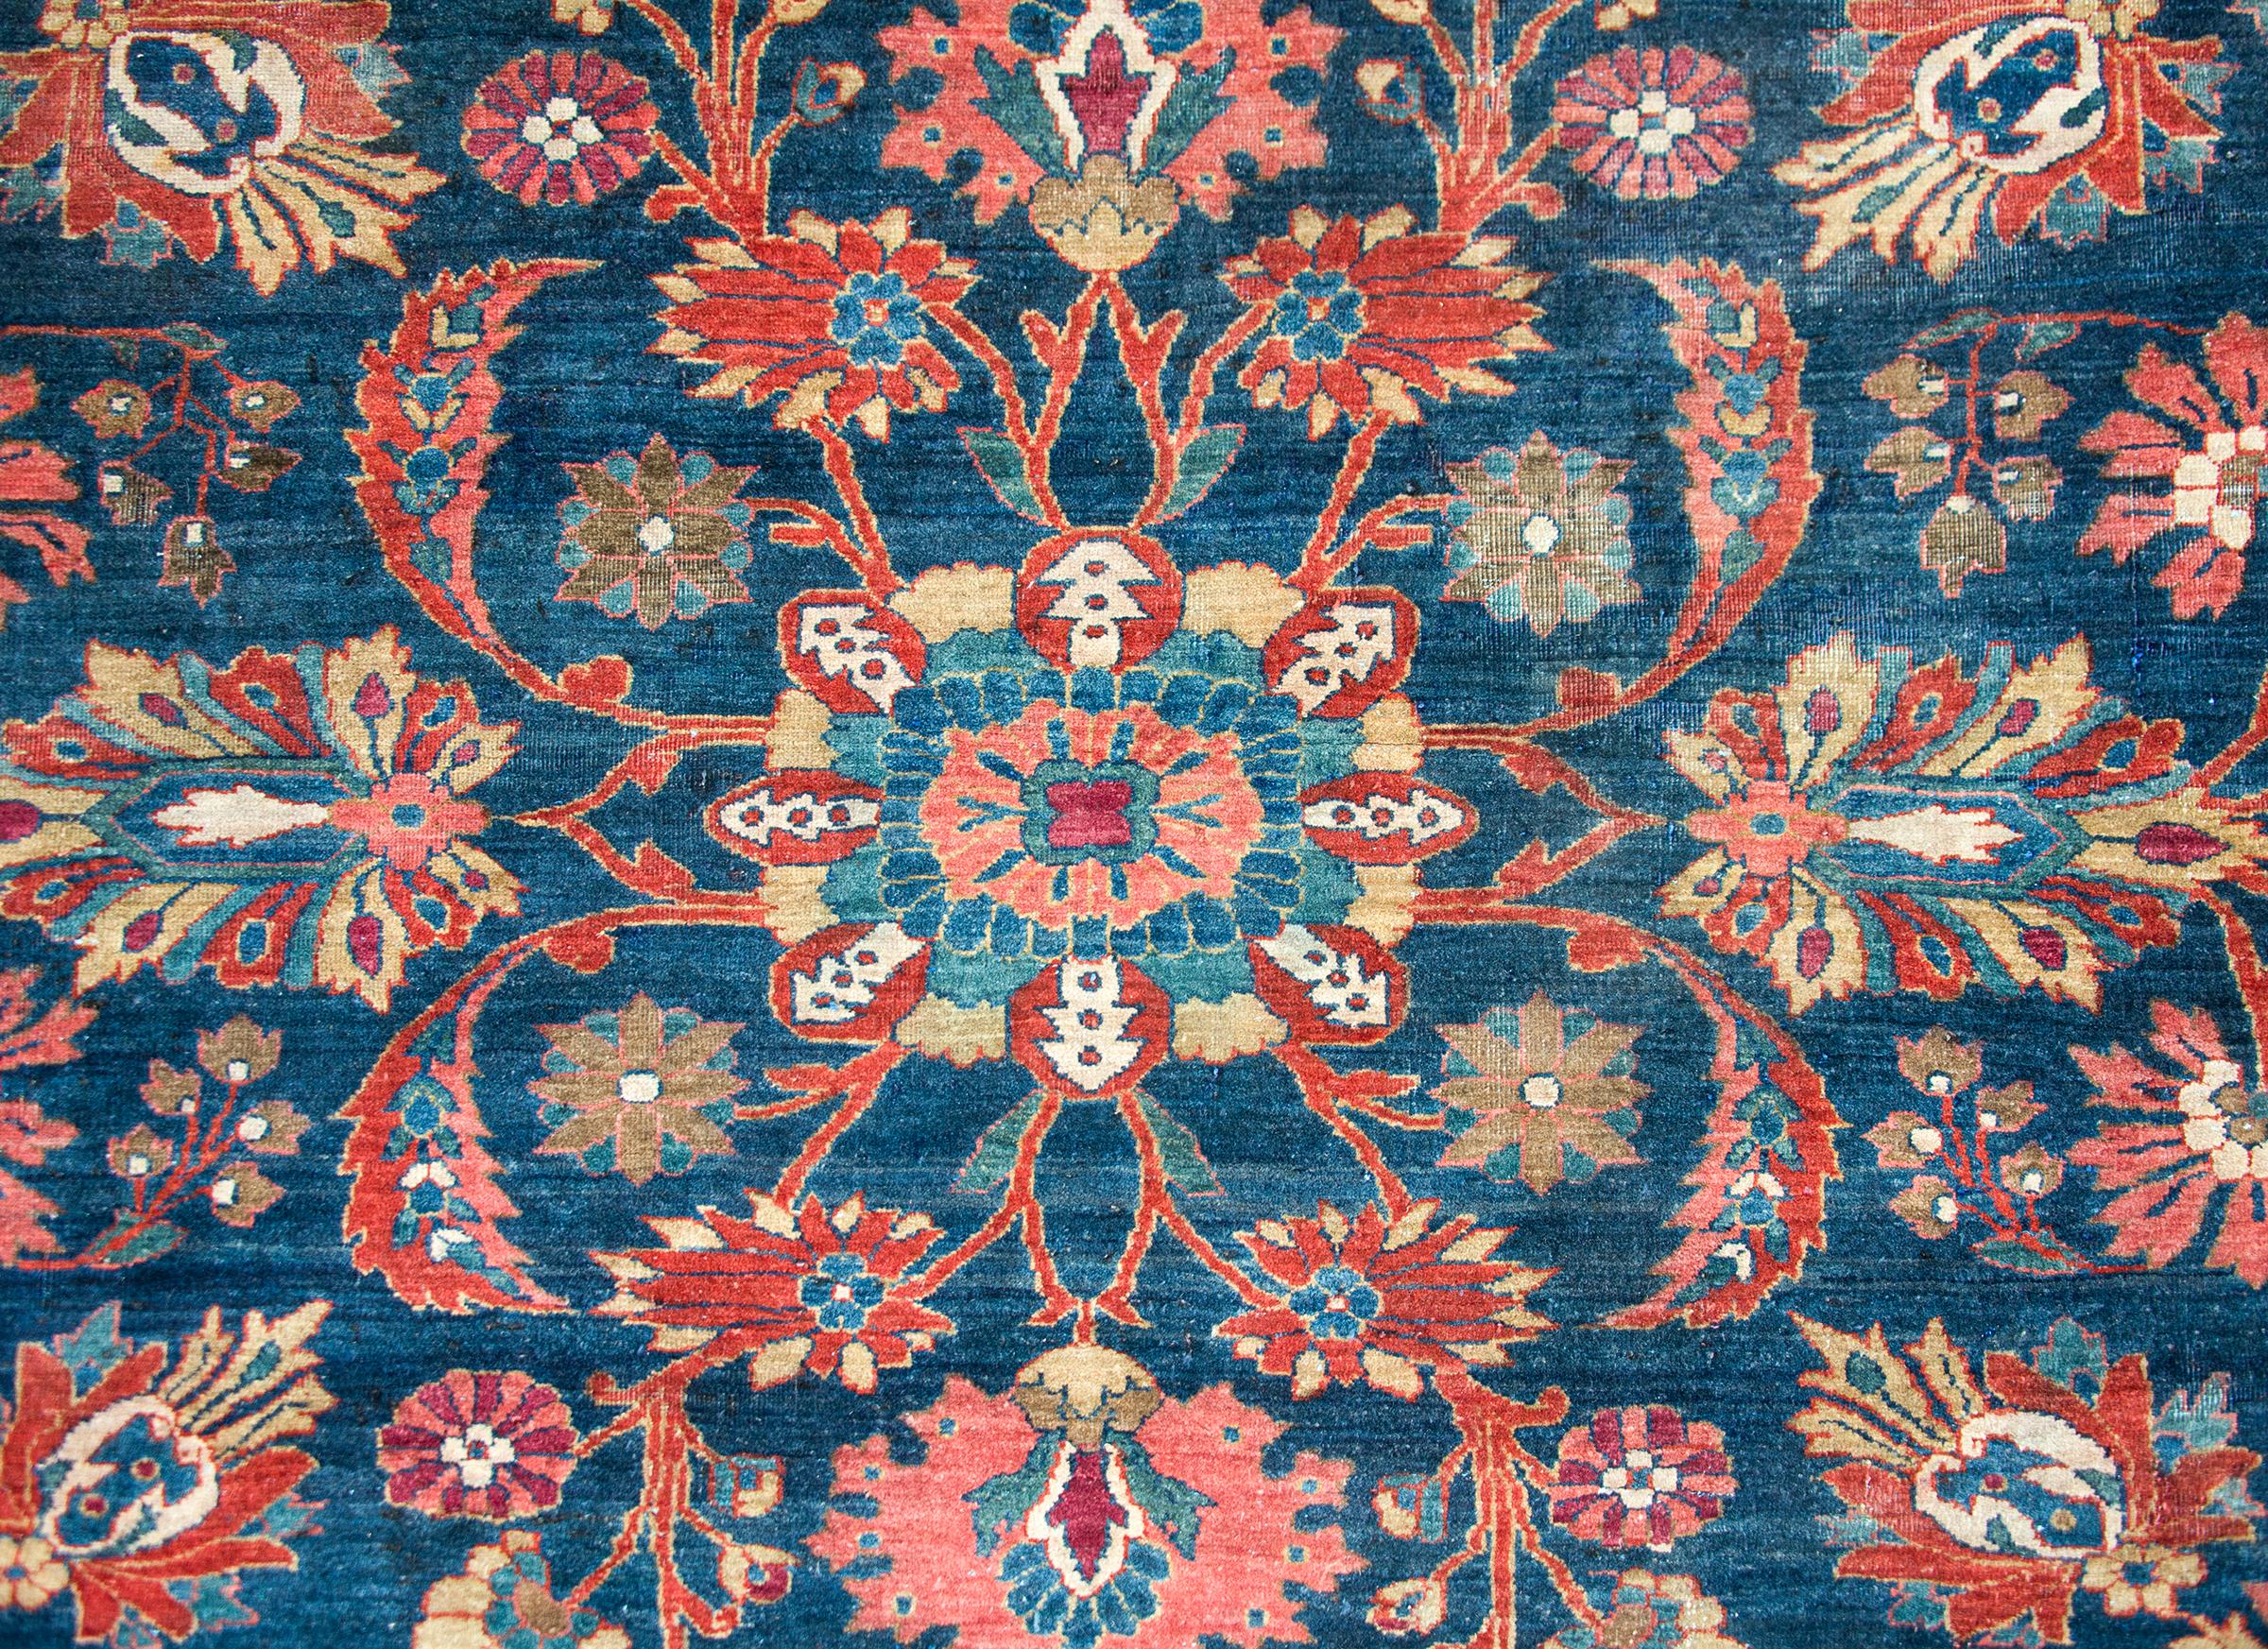 An incredible early 20th century Persian Mohajeran rug with a beautiful central floral medallion living amidst a field of scrolling vines and myriad flowers, surrounded by a complex border with a wide central floral patterned center stripe flanked